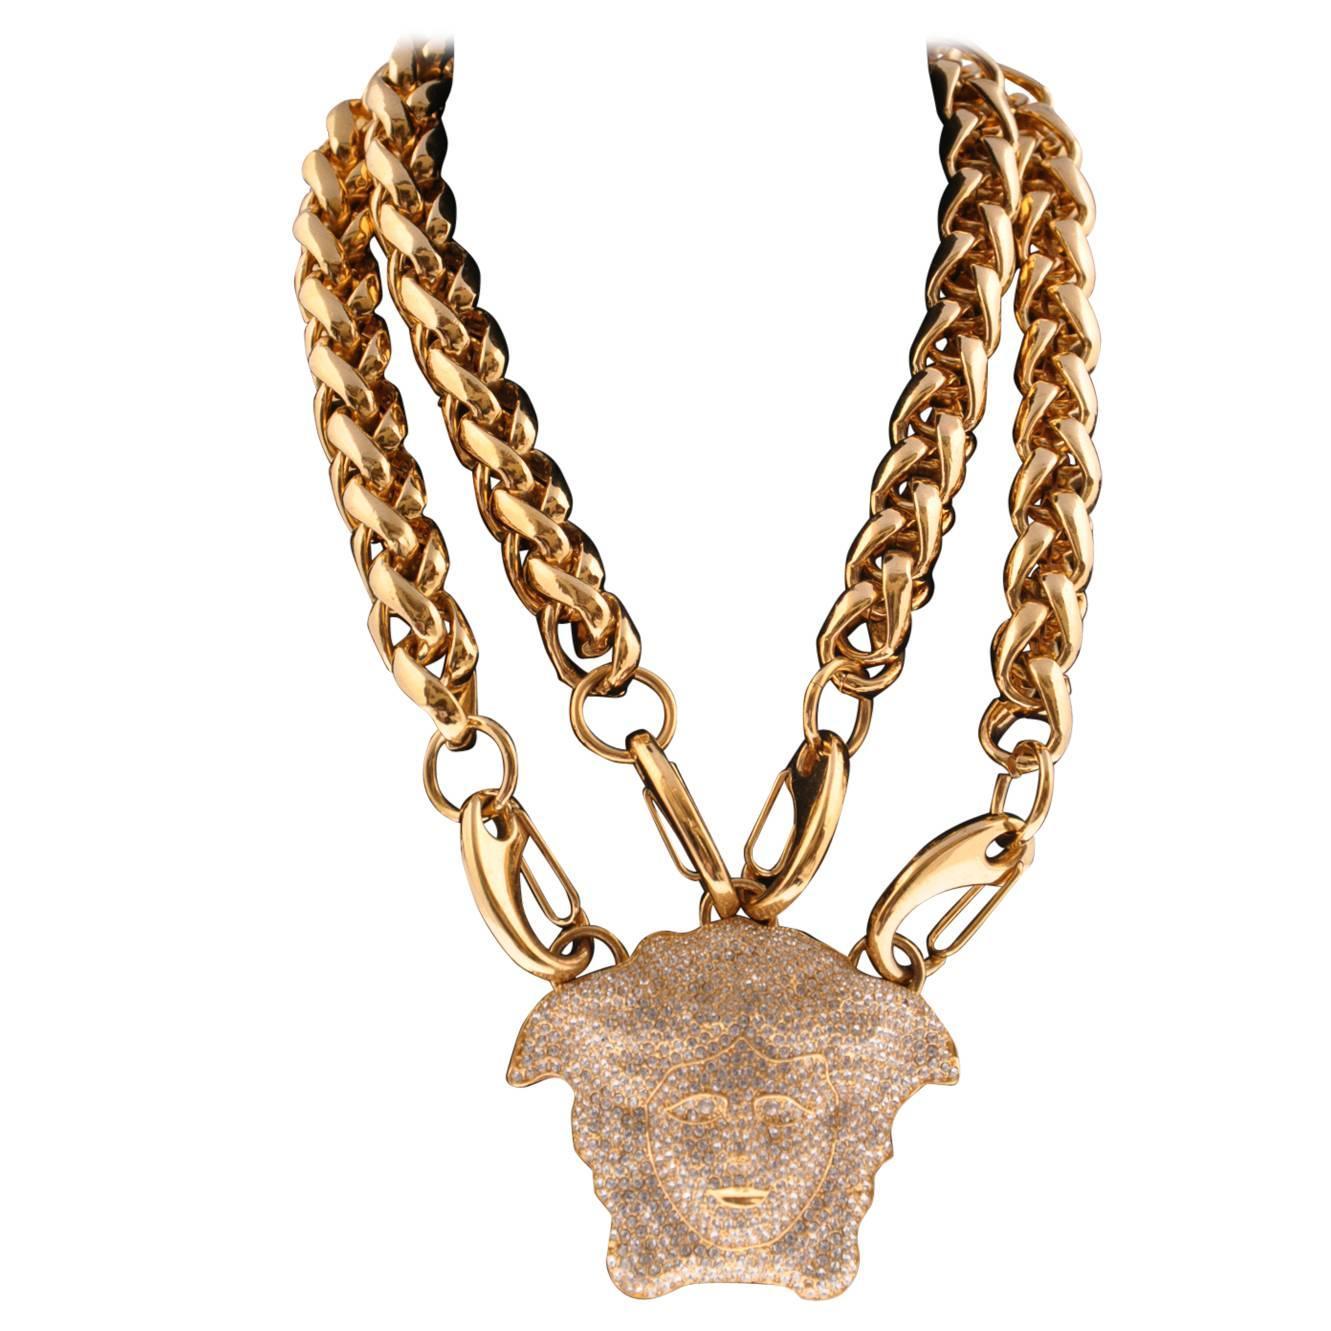 VERSACE GOLD DOUBLE CHAIN NECKLACE w/ CRYSTAL EMBELLISHED MEDUSA 